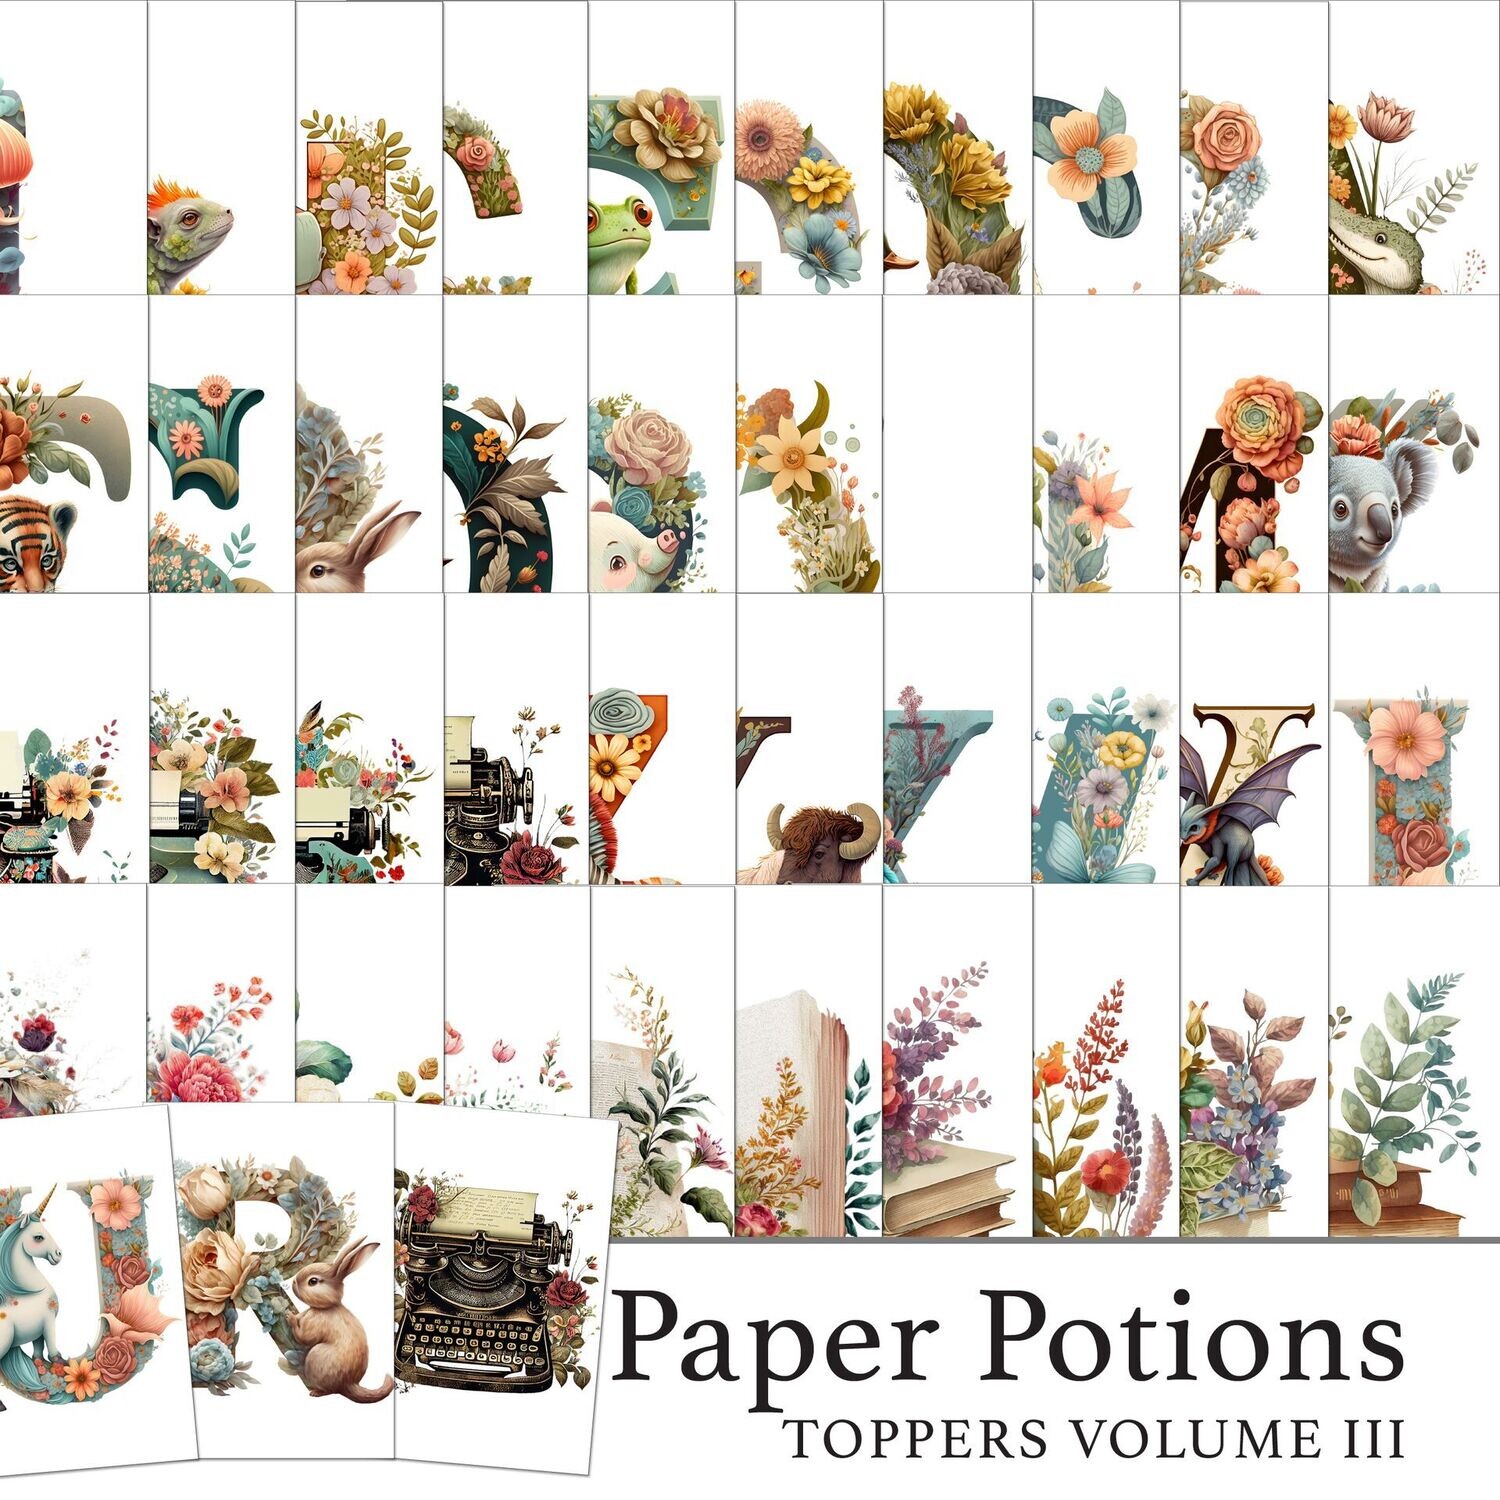 Paper Potions - 80 Toppers Vol III Digital Kit